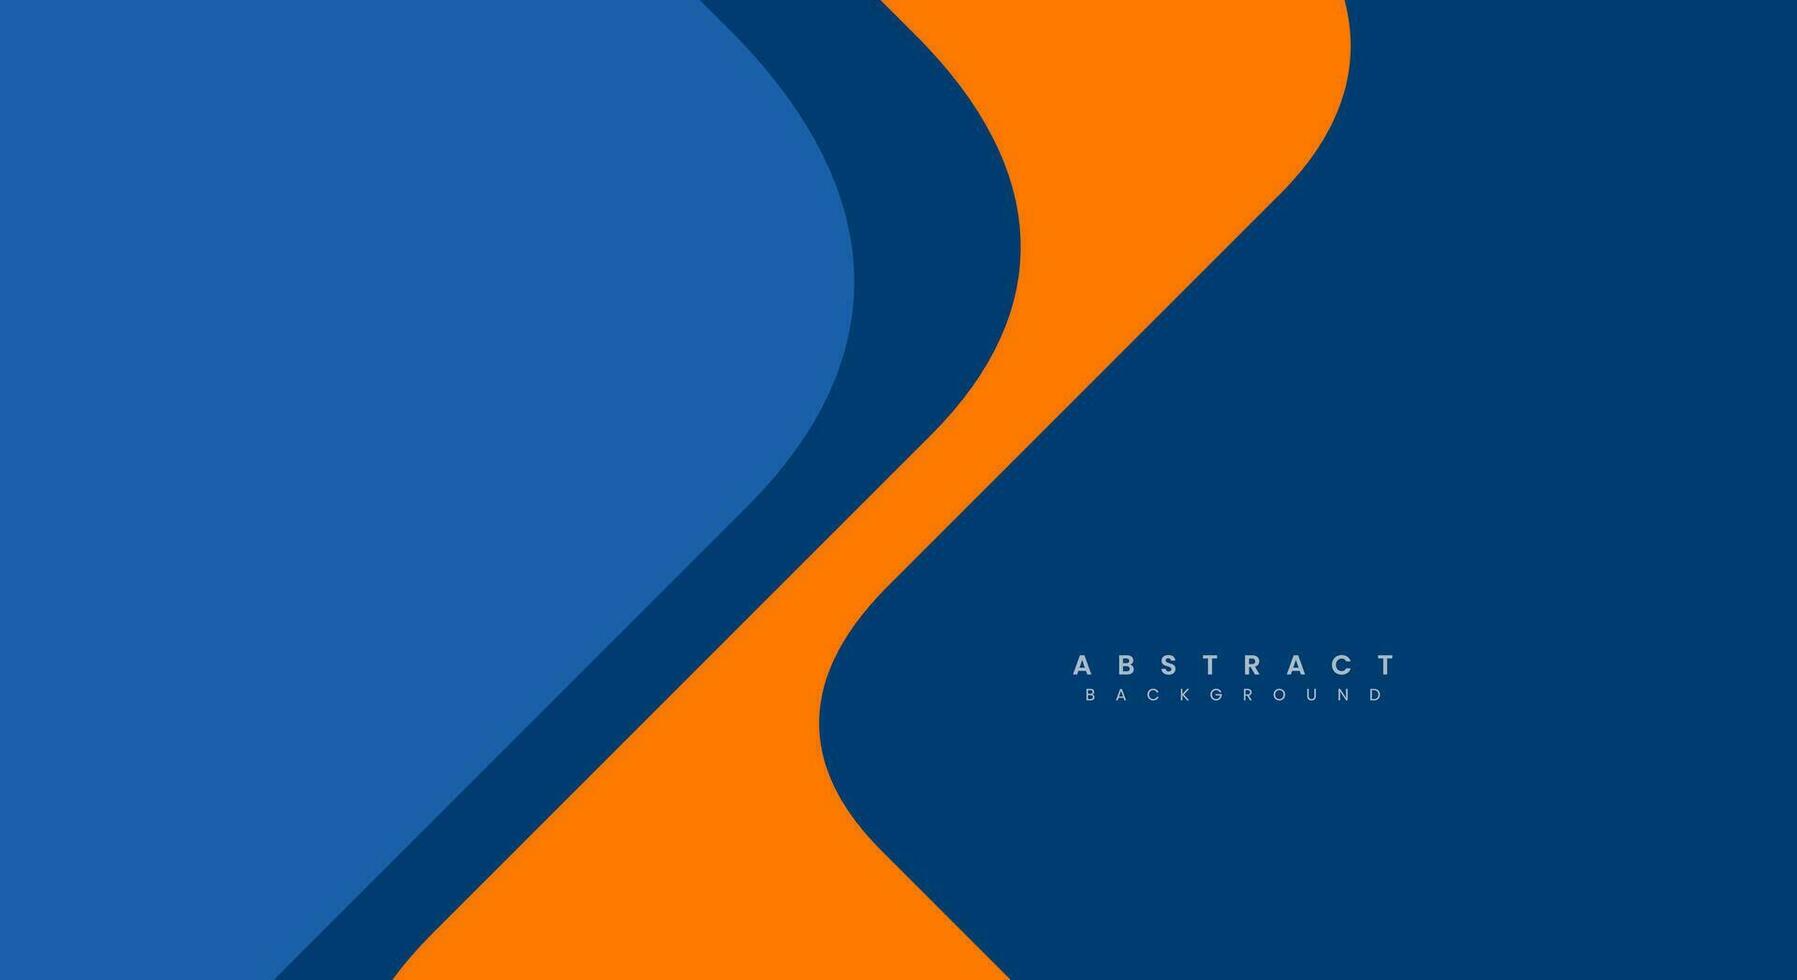 Simple flat blue and orange background vector